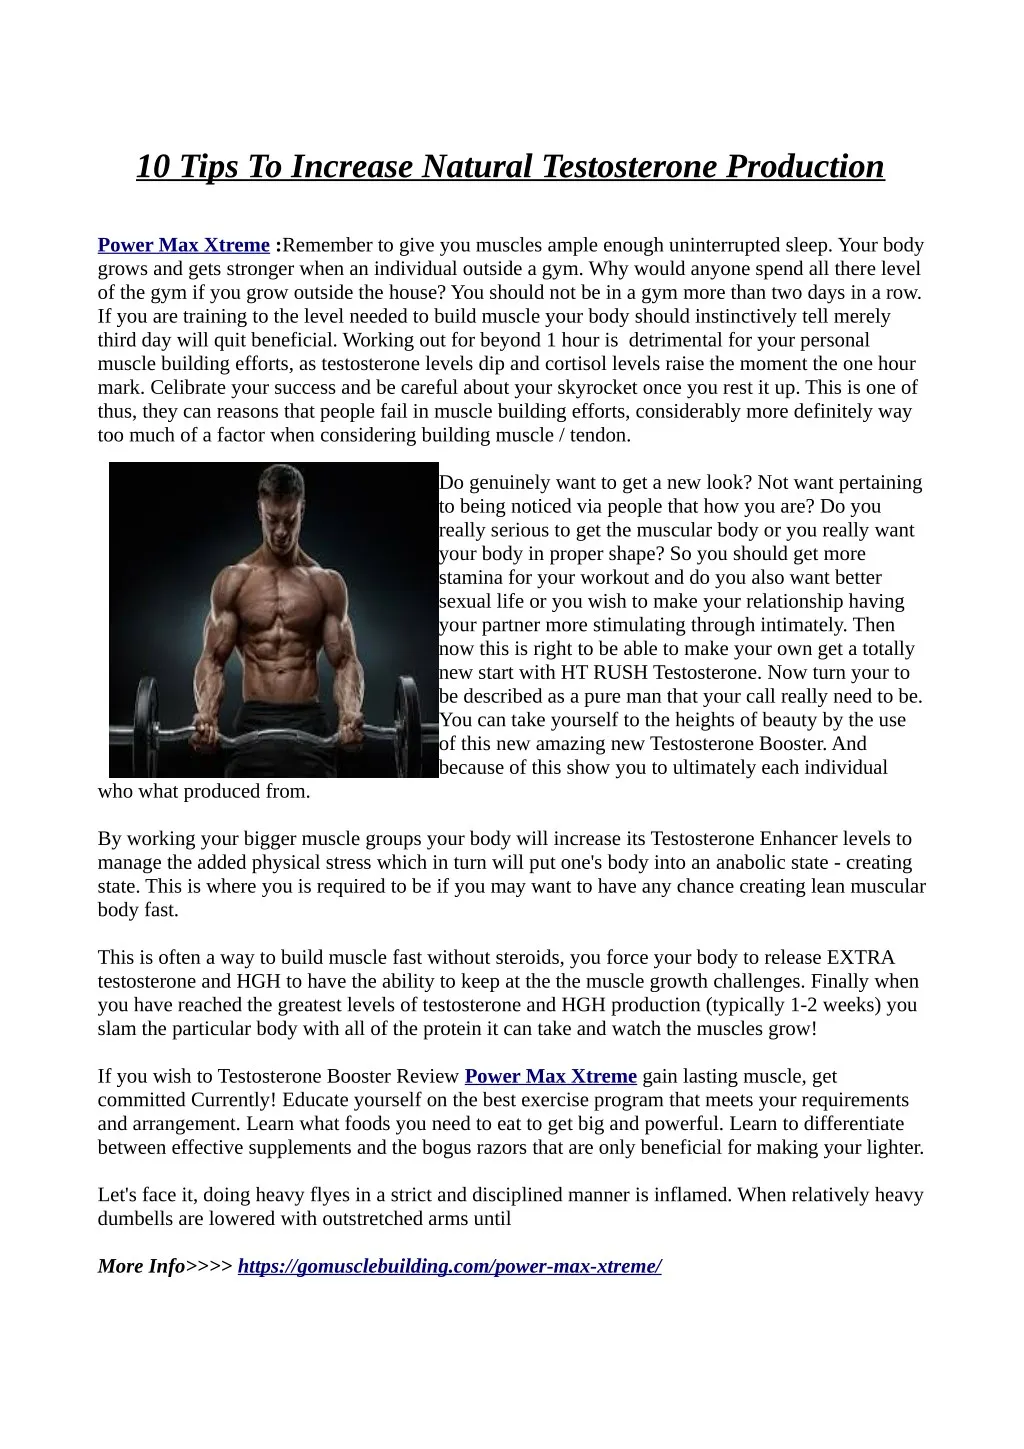 10 tips to increase natural testosterone